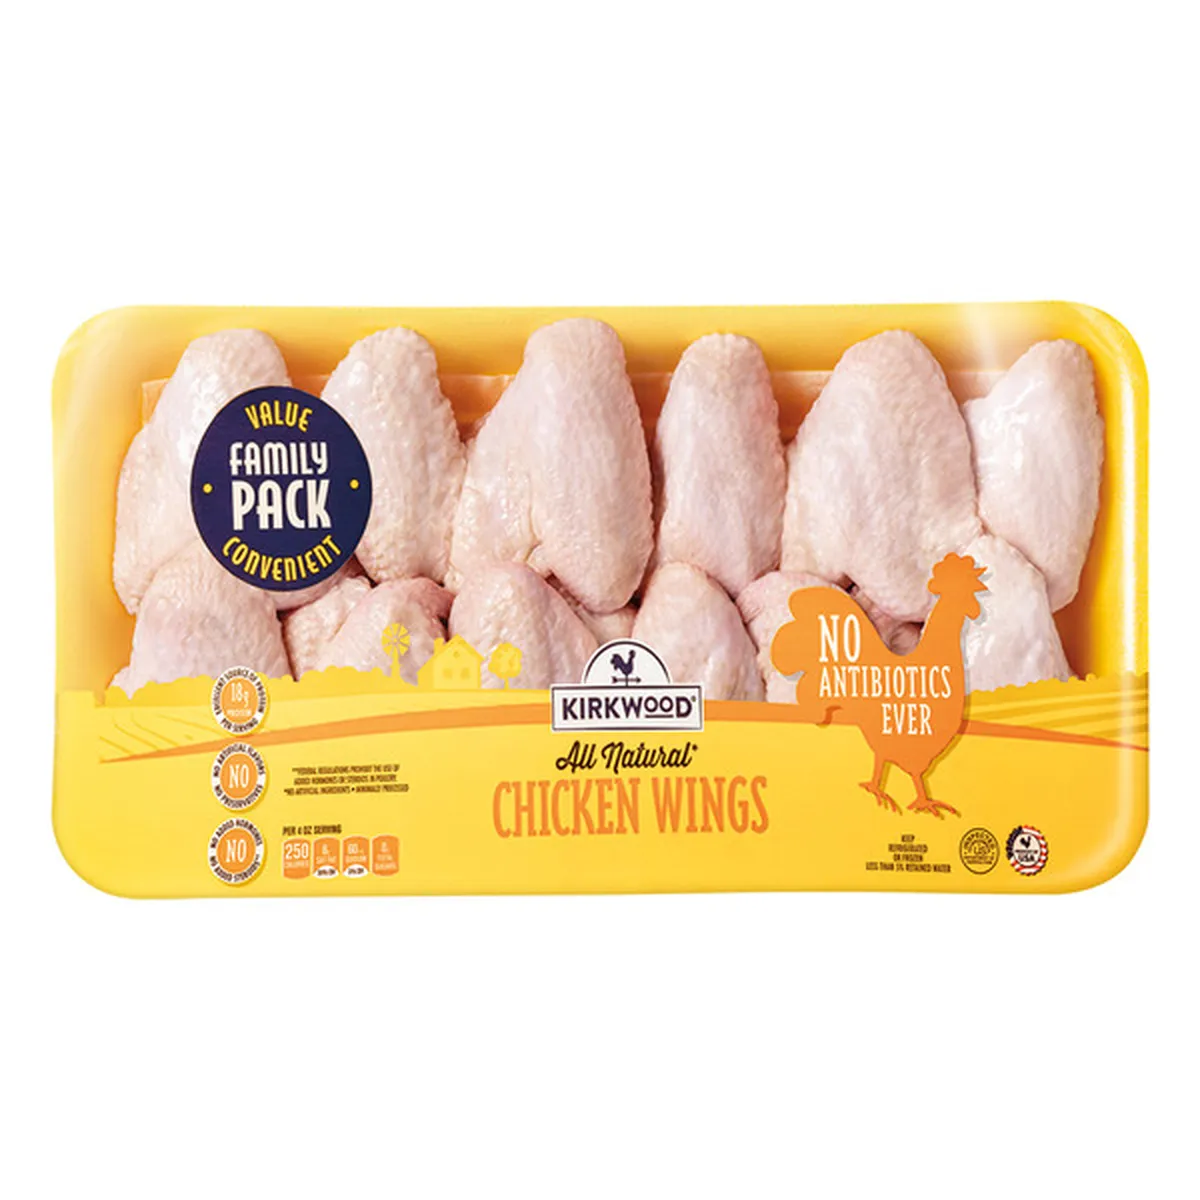 Pilgrim's Chicken Wing Sections, Family Value Pack - FRESH by Brookshire's